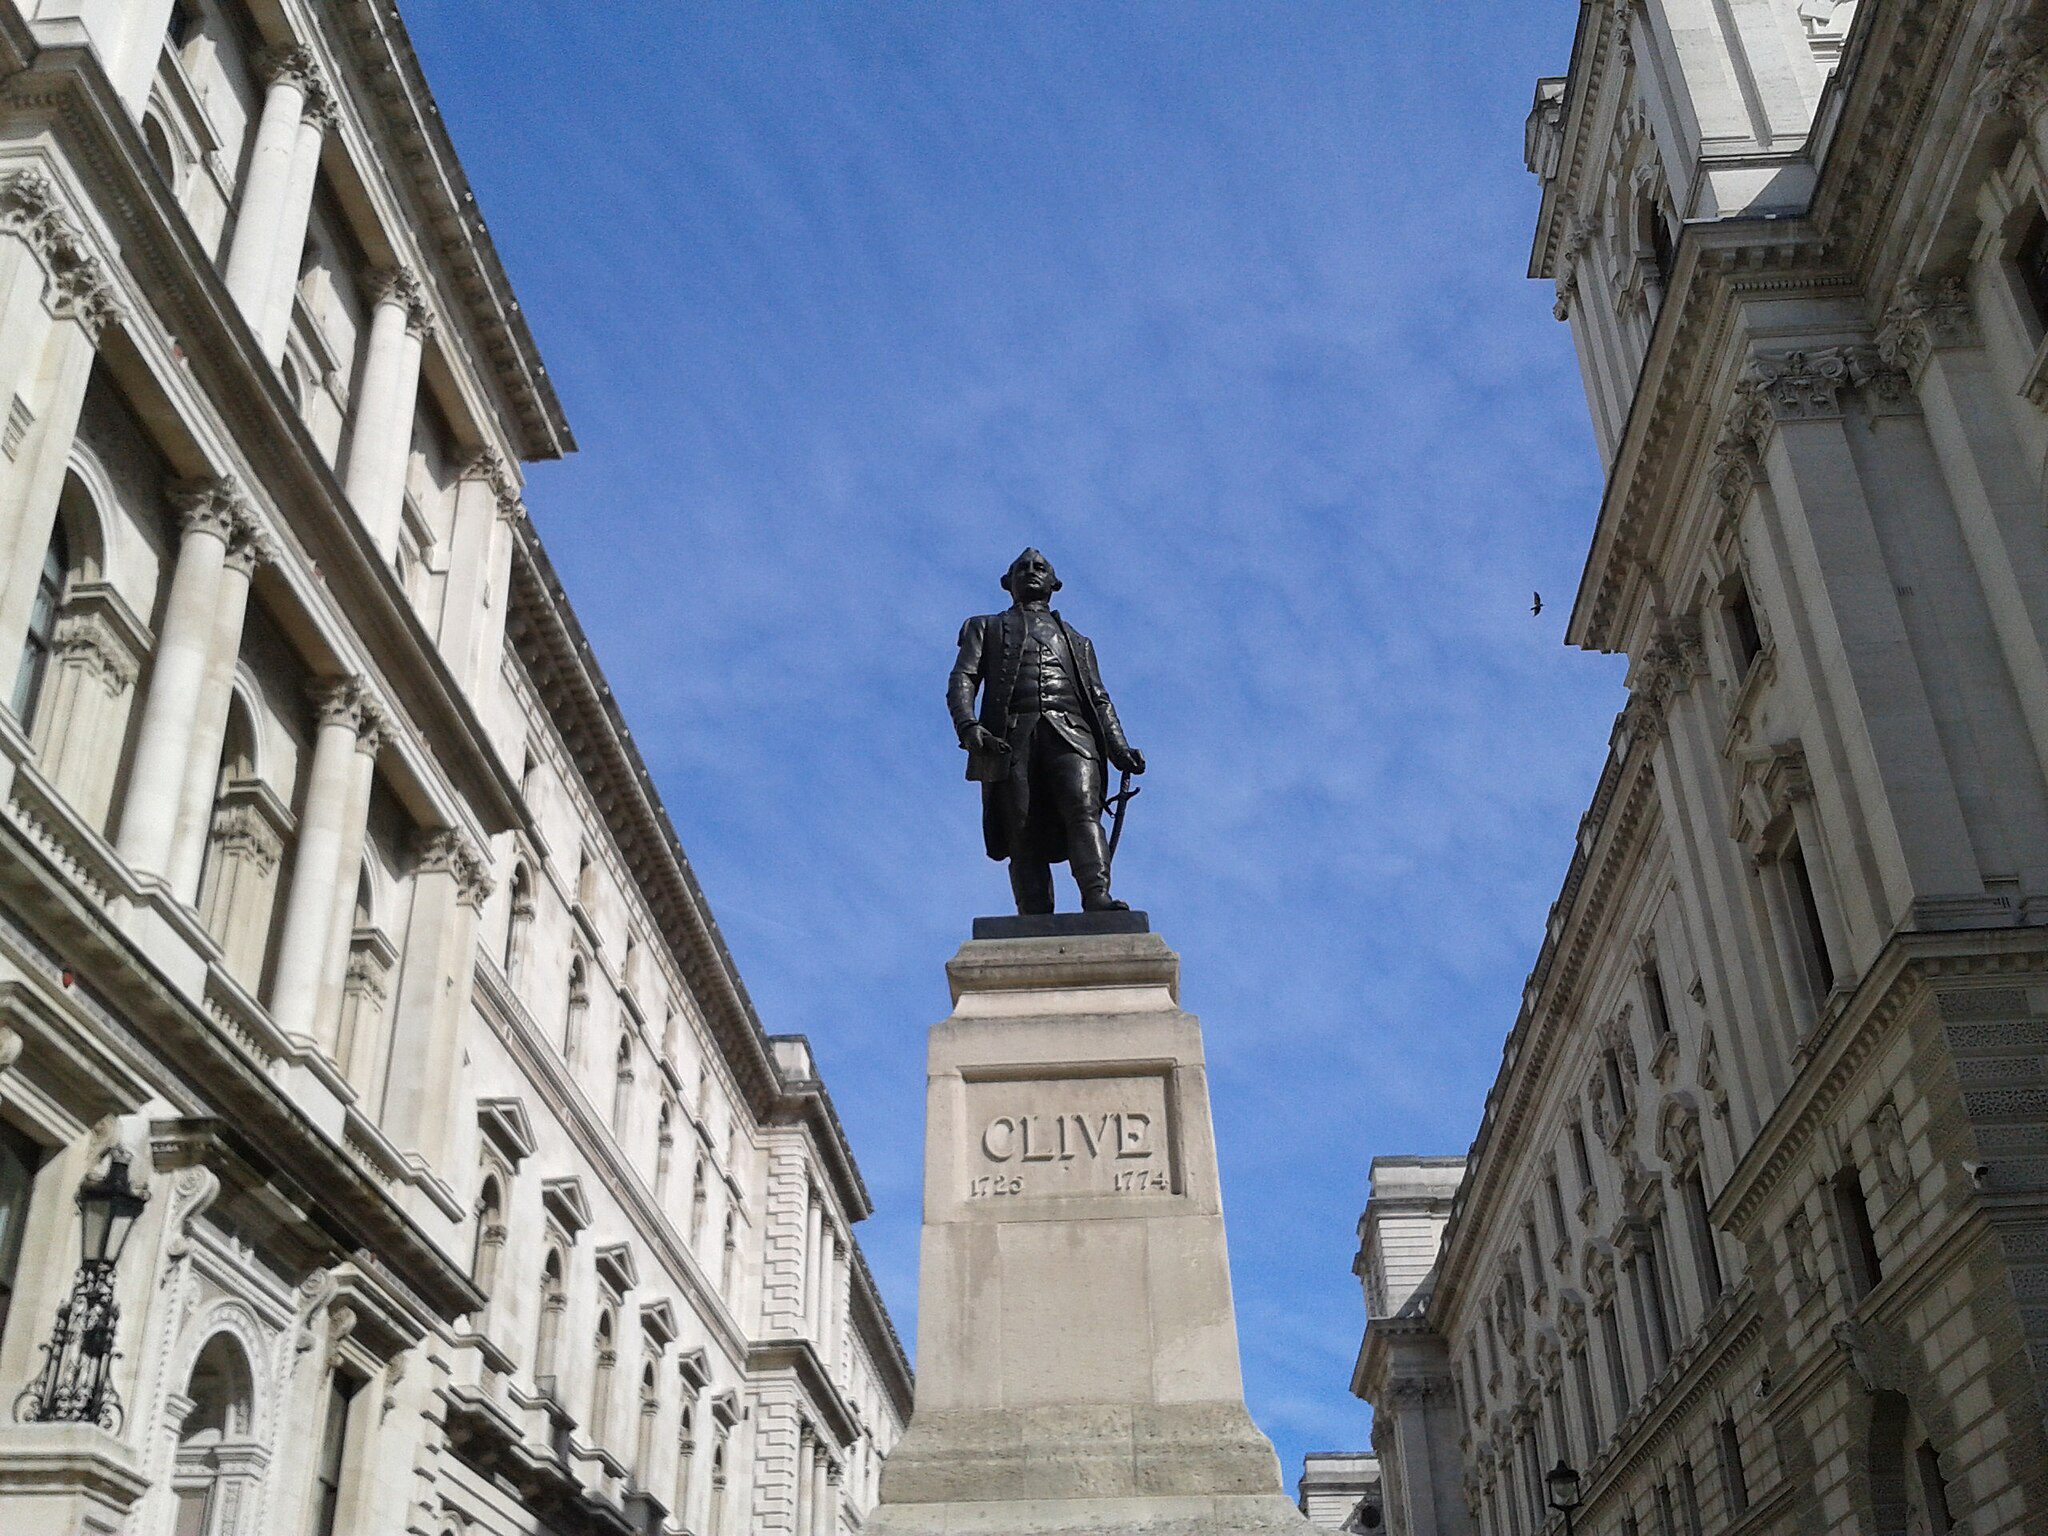 photo of statue of Robert Clive on pedestal between rows of buildings